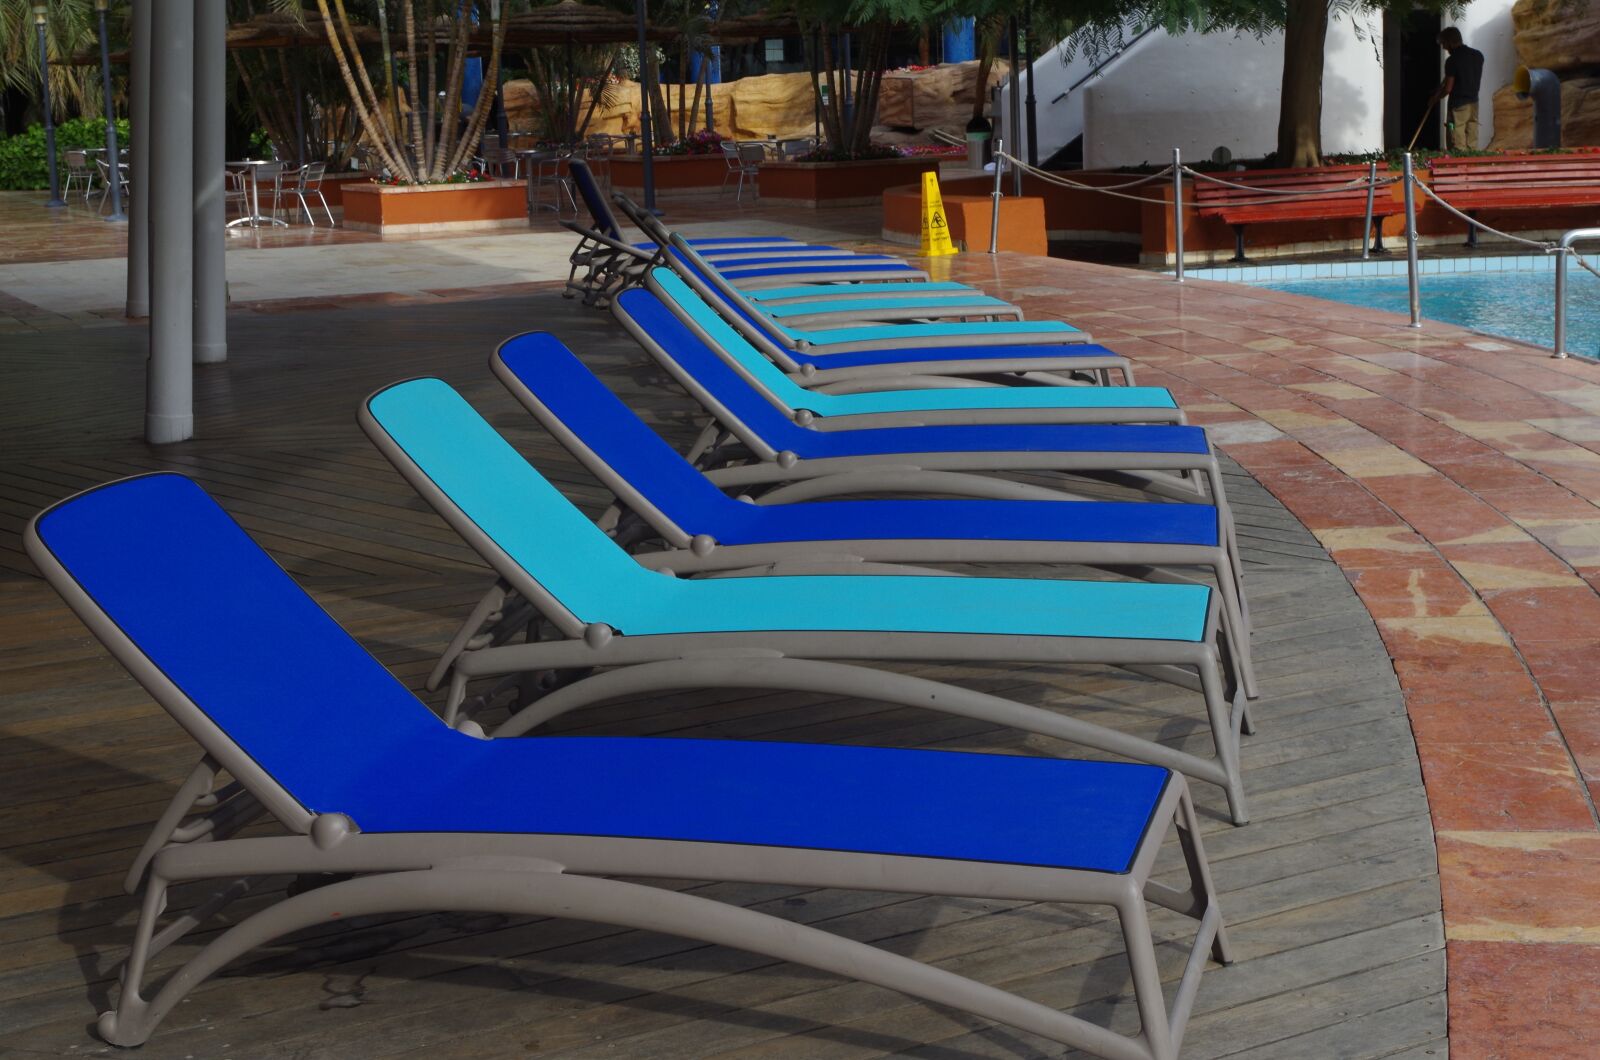 Pentax K-500 sample photo. Deck-chairs, sun loungers, holiday photography